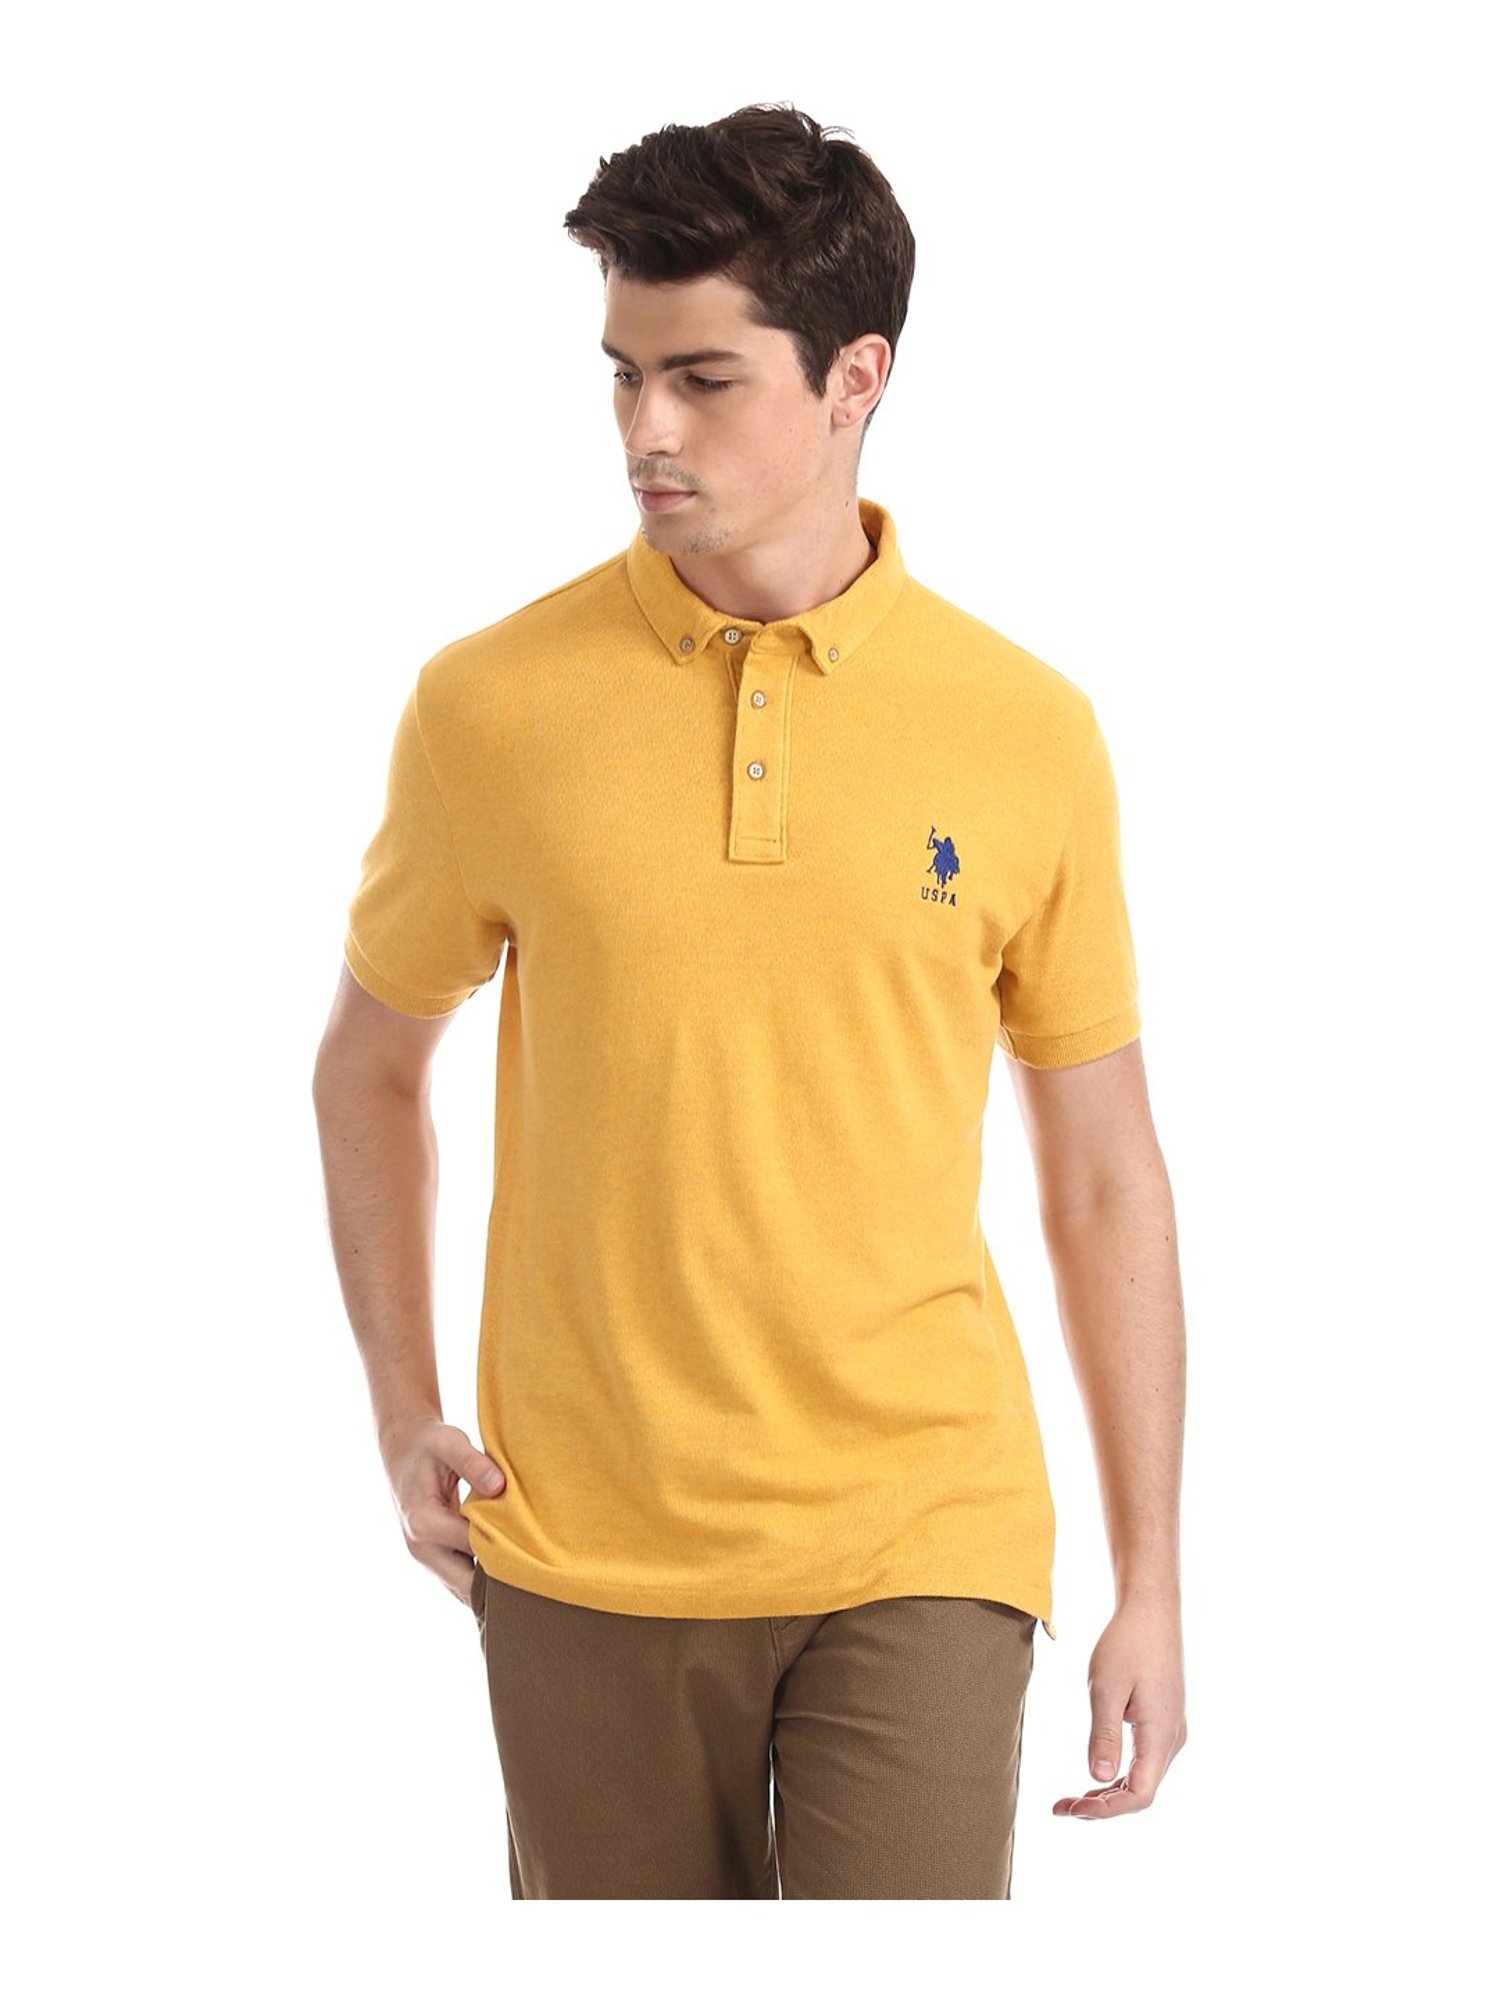 polo t shirt meaning